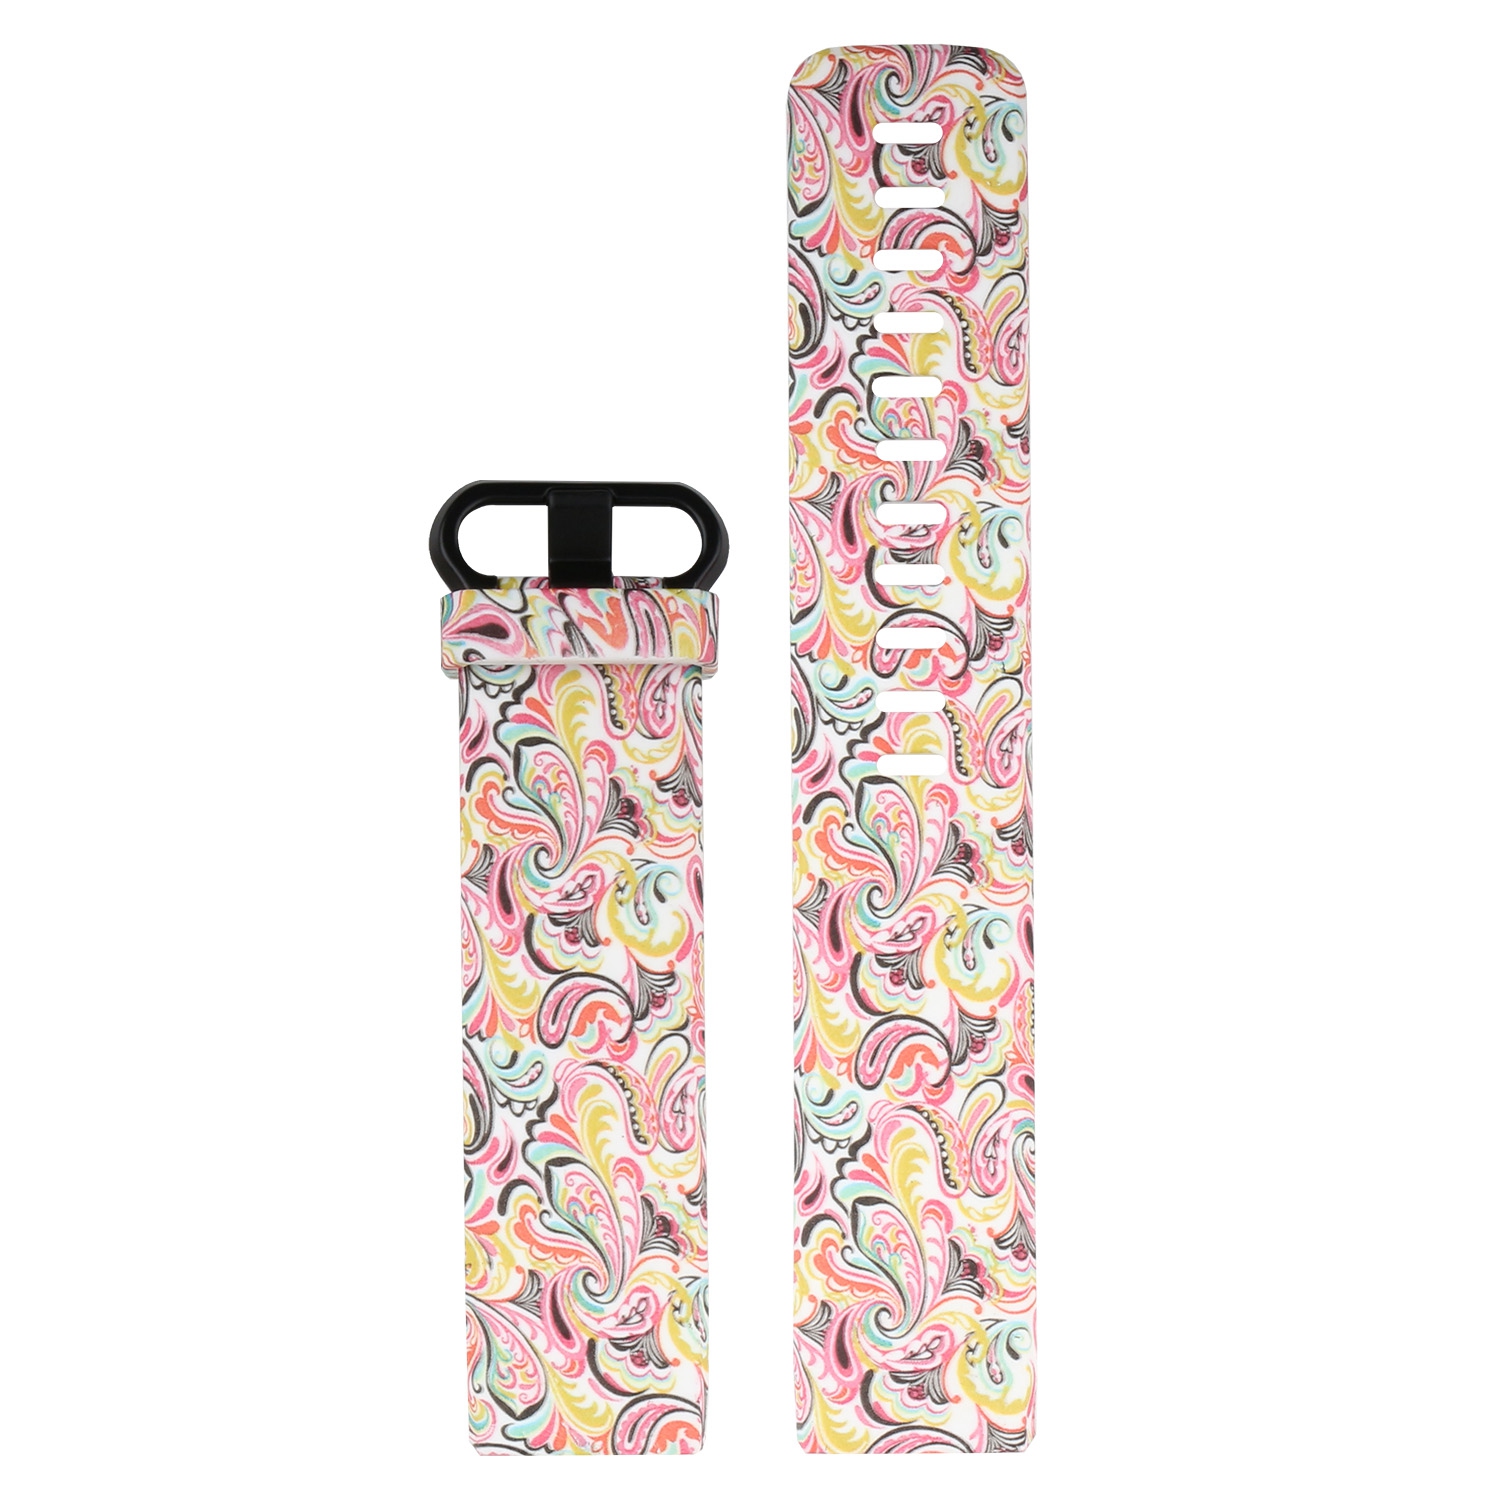 StrapsCo Patterned Silicone Rubber Watch Band Strap for Fitbit Charge 3 & Charge 4 - Short-Medium - Light Paisley